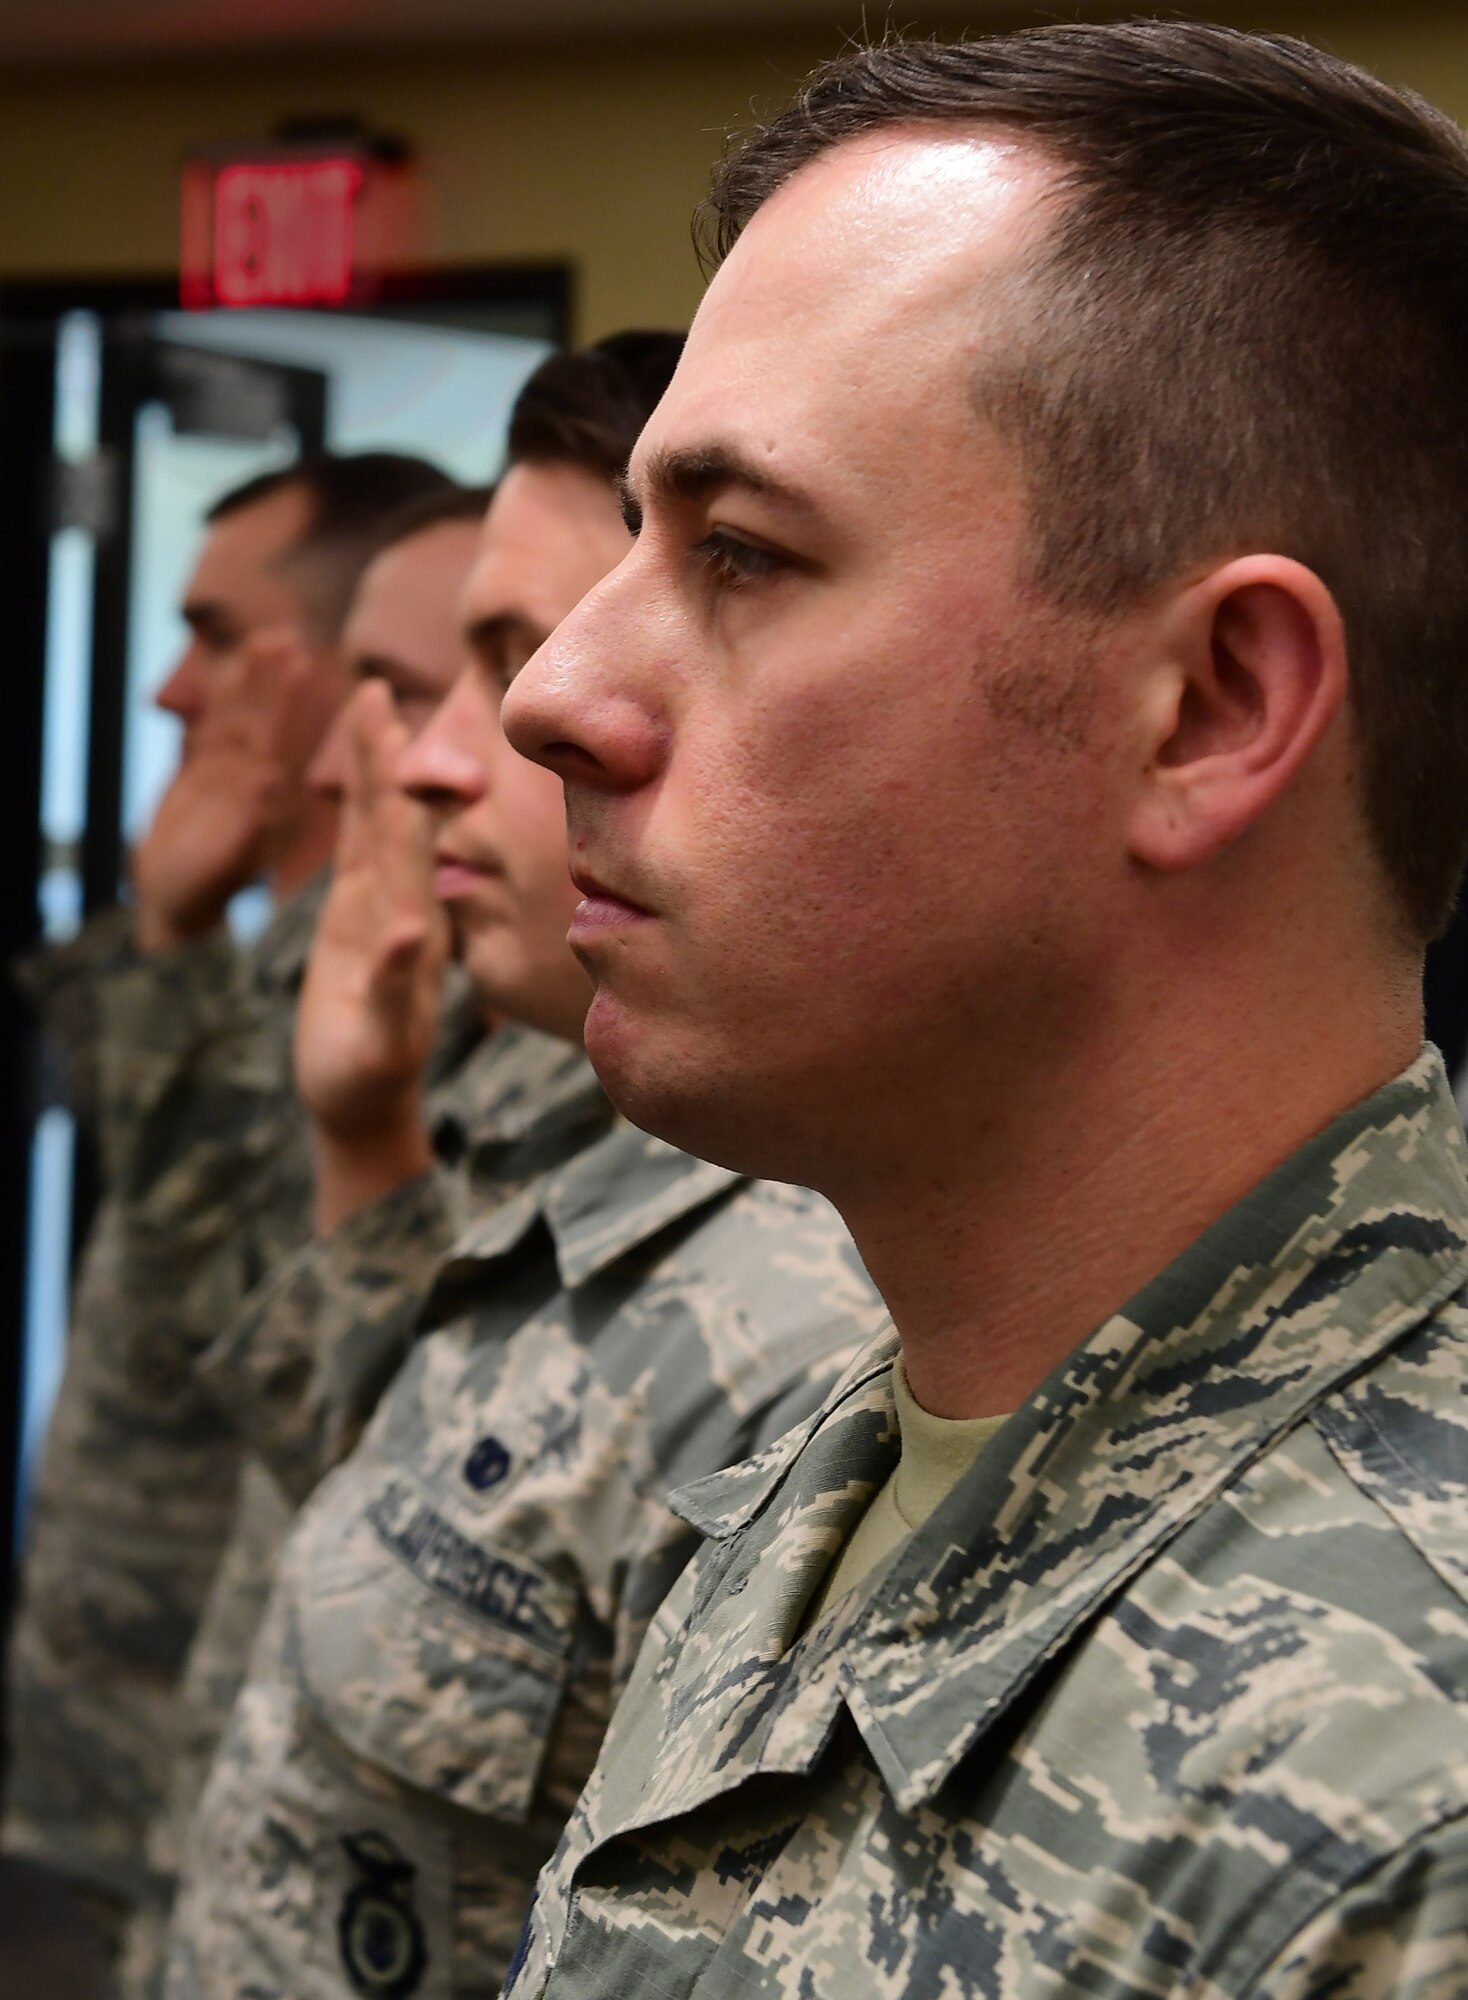 Members of the 911th Security Forces Squadron are administered the Noncommisioned Officer Charge during an NCO promotion and induction ceremony at the Pittsburgh International Airport Air Reserve Station, Pennsylvania, June 2, 2019. Three members were promoted to the rank of staff sergeant and one member was promoted to technical sergeant during the ceremony.